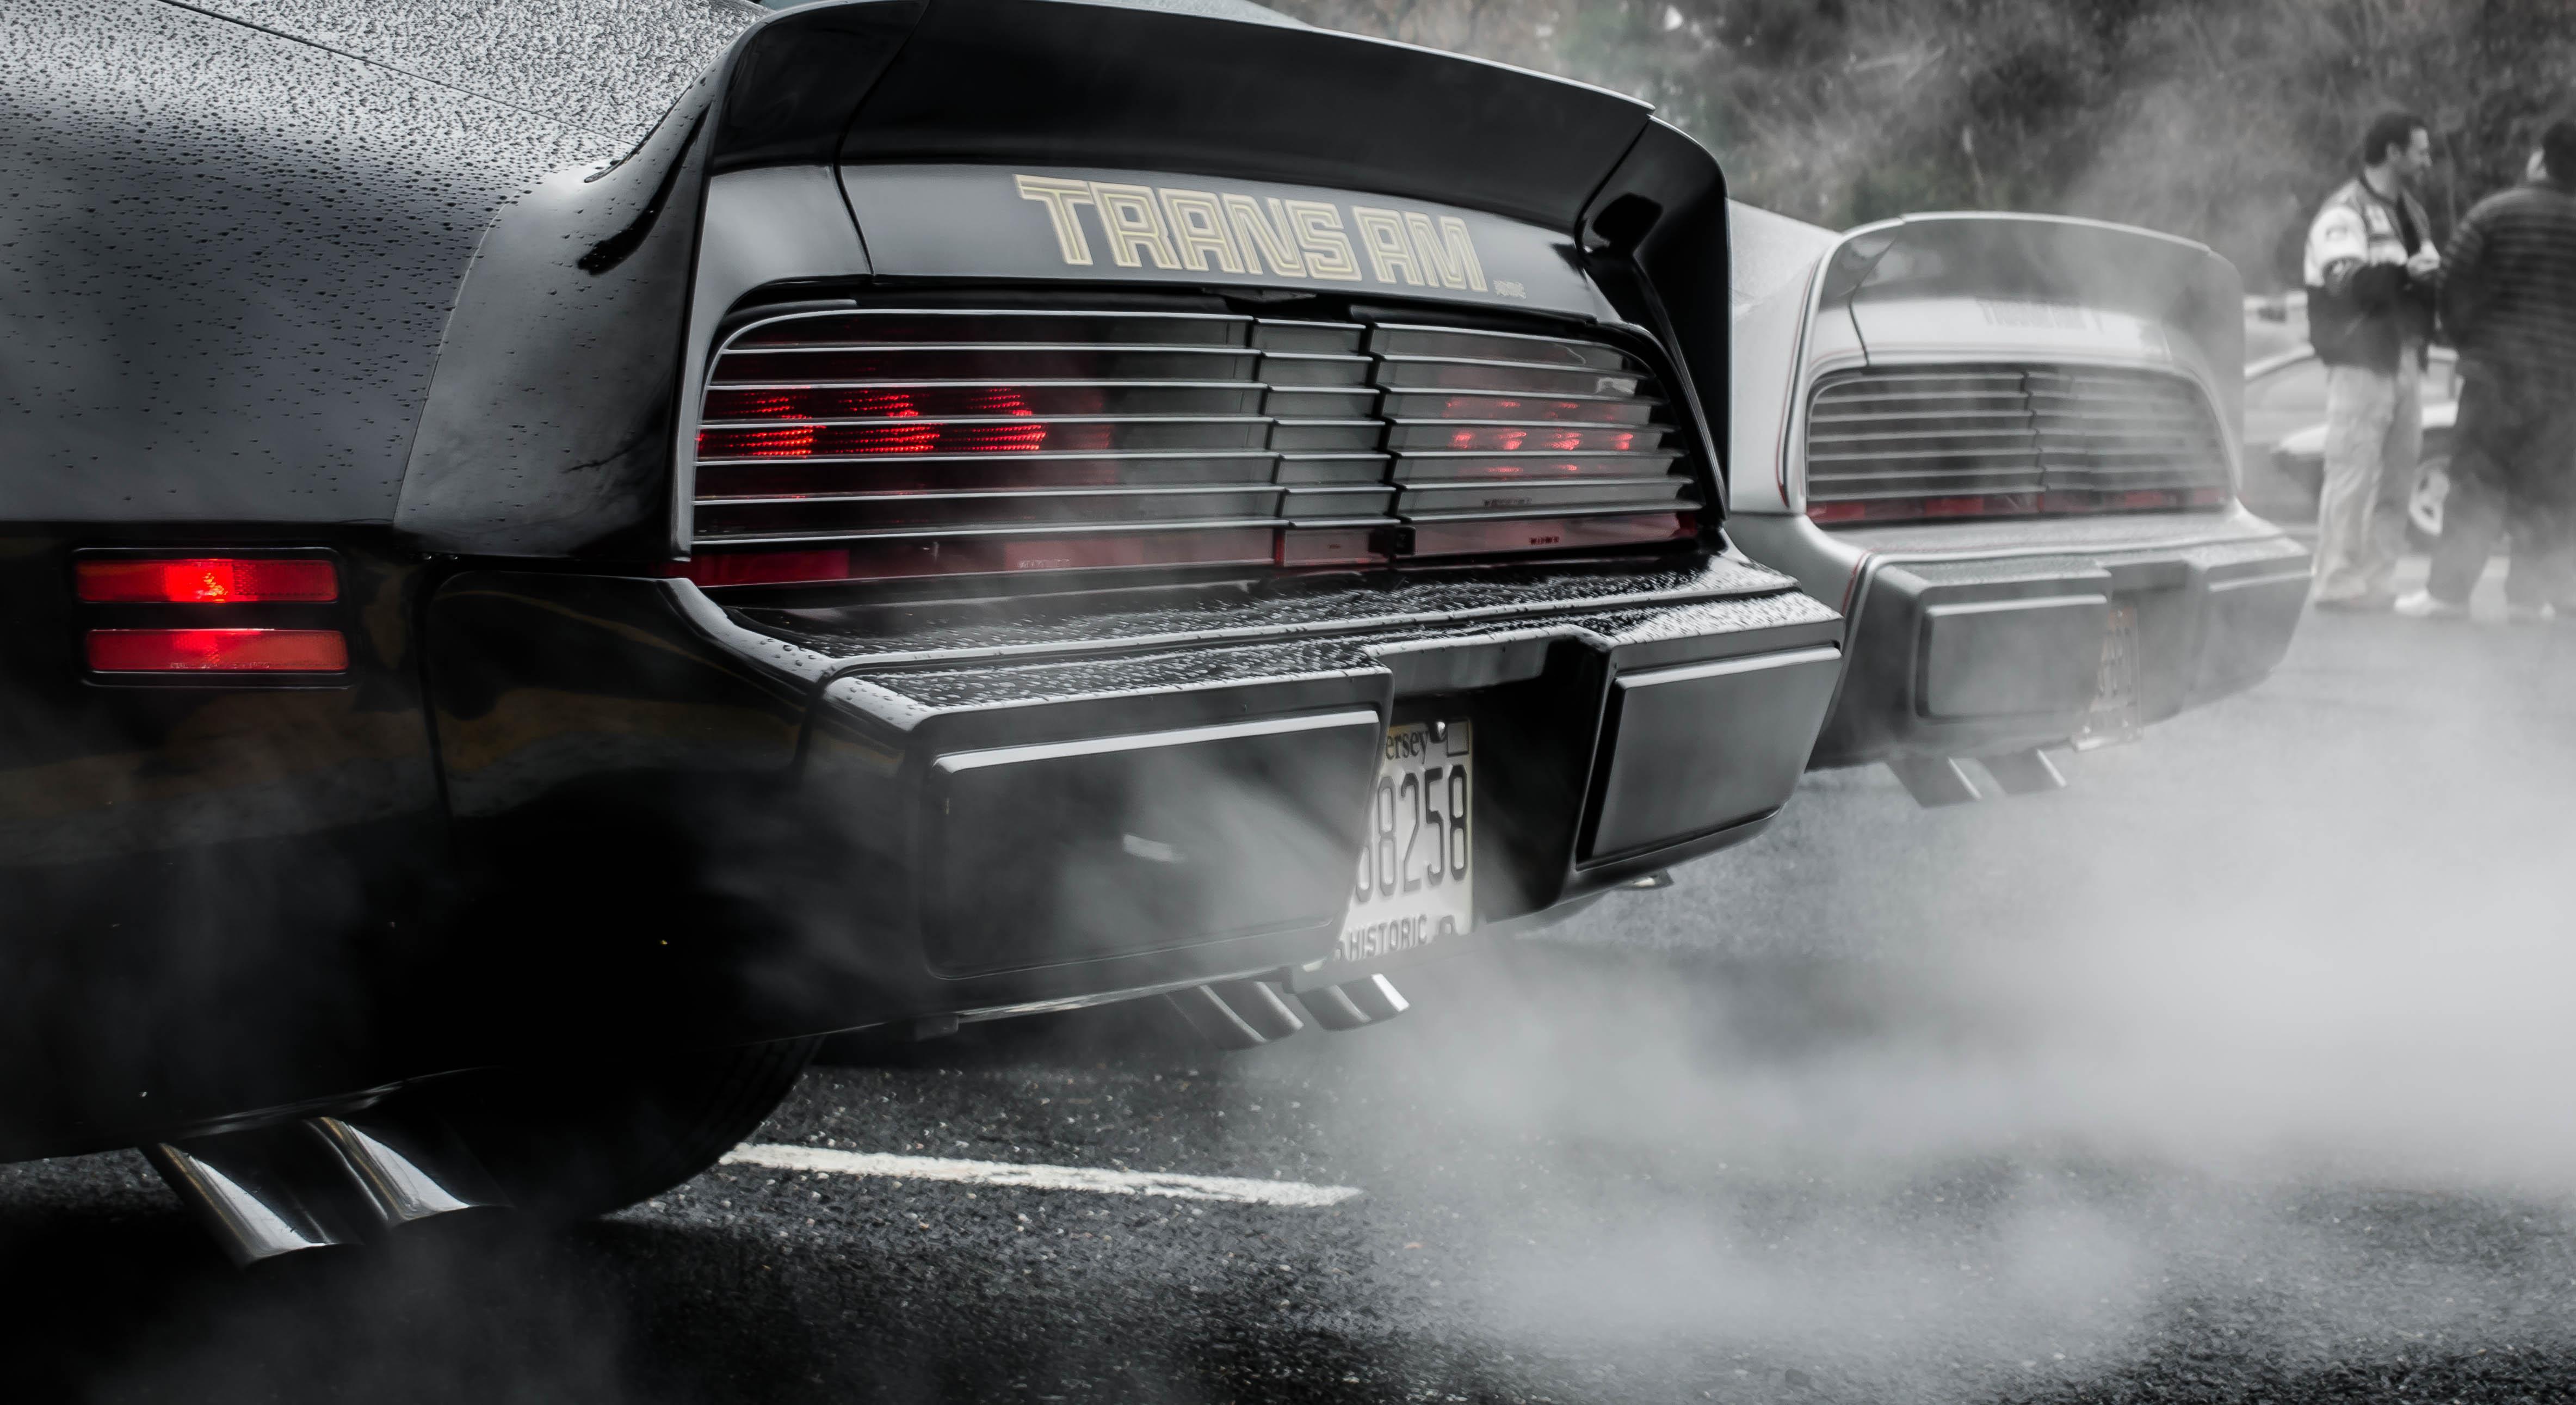 Your Ridiculously Awesome Pontiac Firebird Wallpaper Is Here